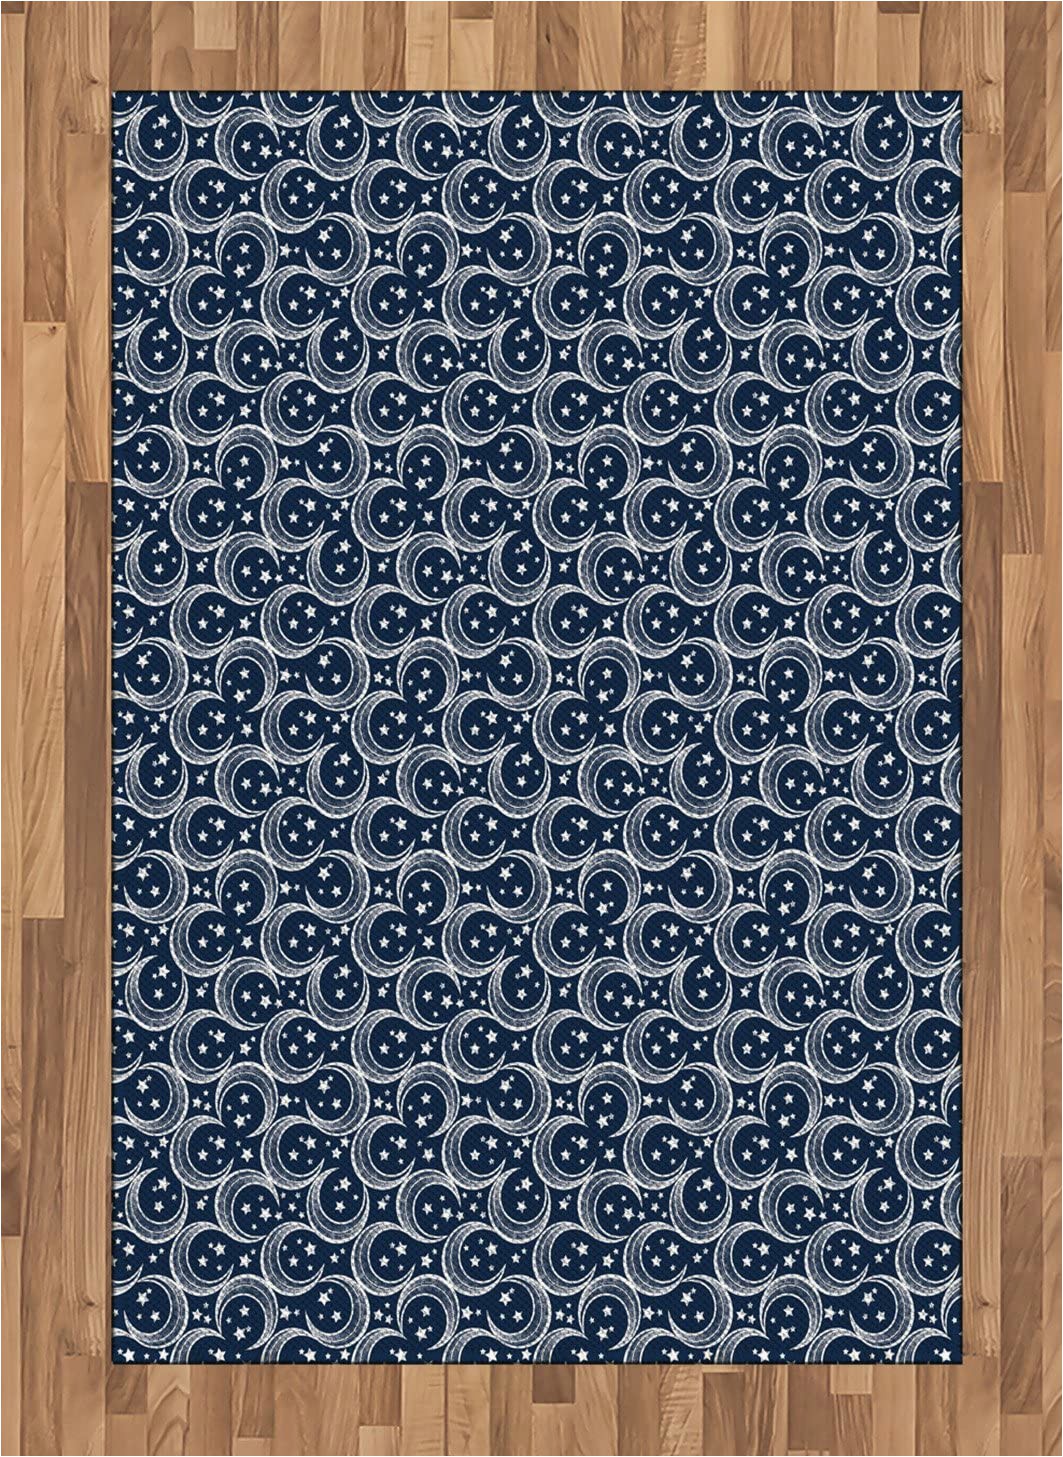 Moon and Stars area Rug Amazon Lunarable Blue and White area Rug Crescent Moon